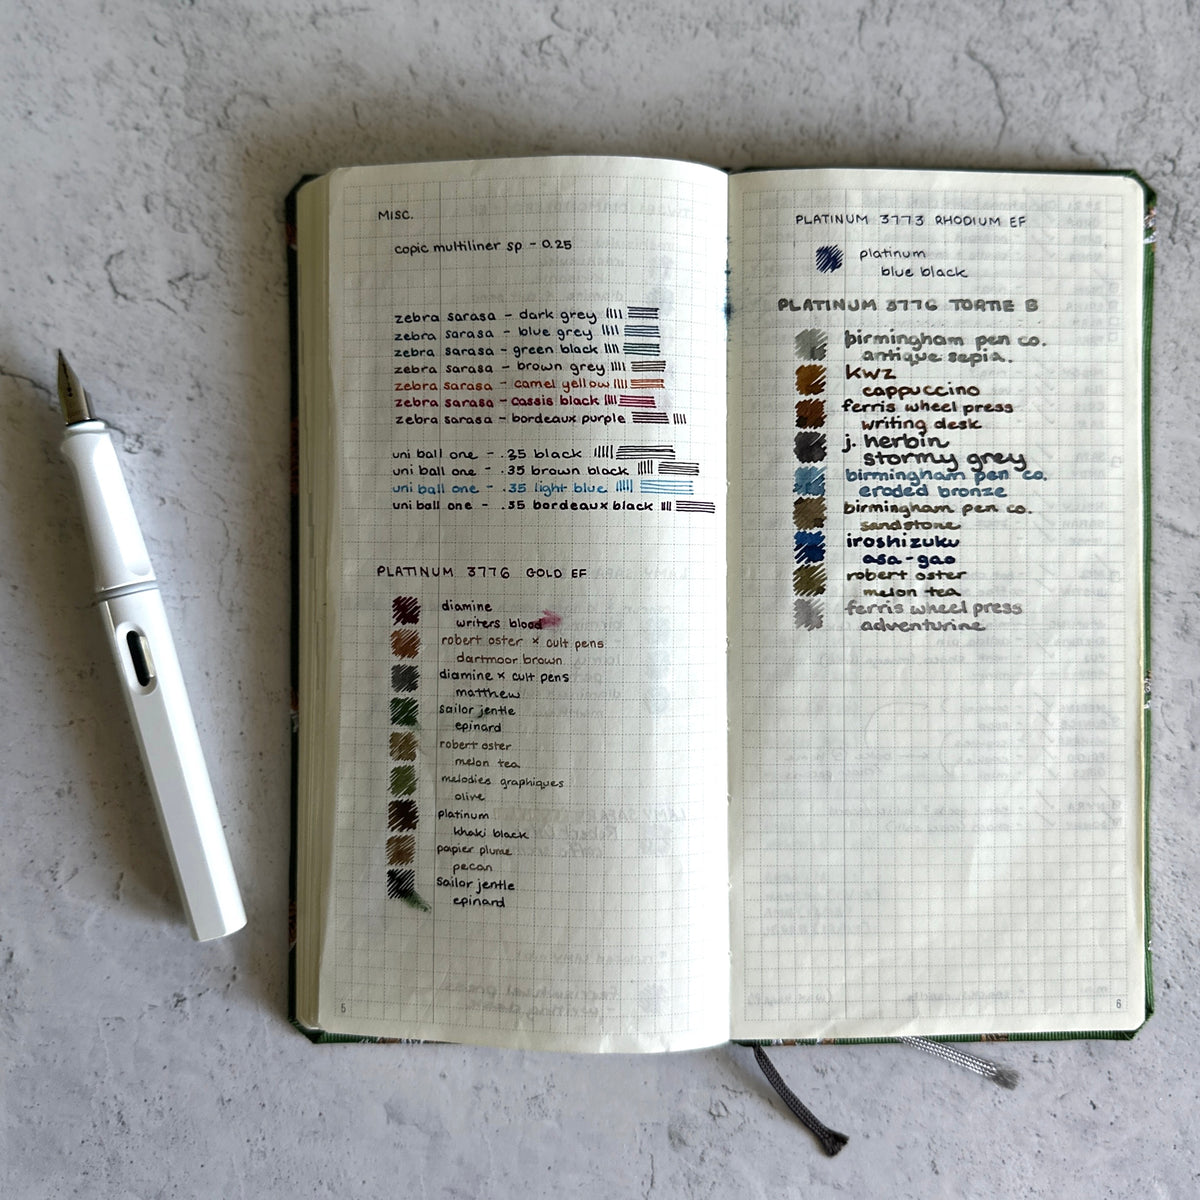 [Hobonichi 2024] Weeks // Another night of falling star sparklers (English)